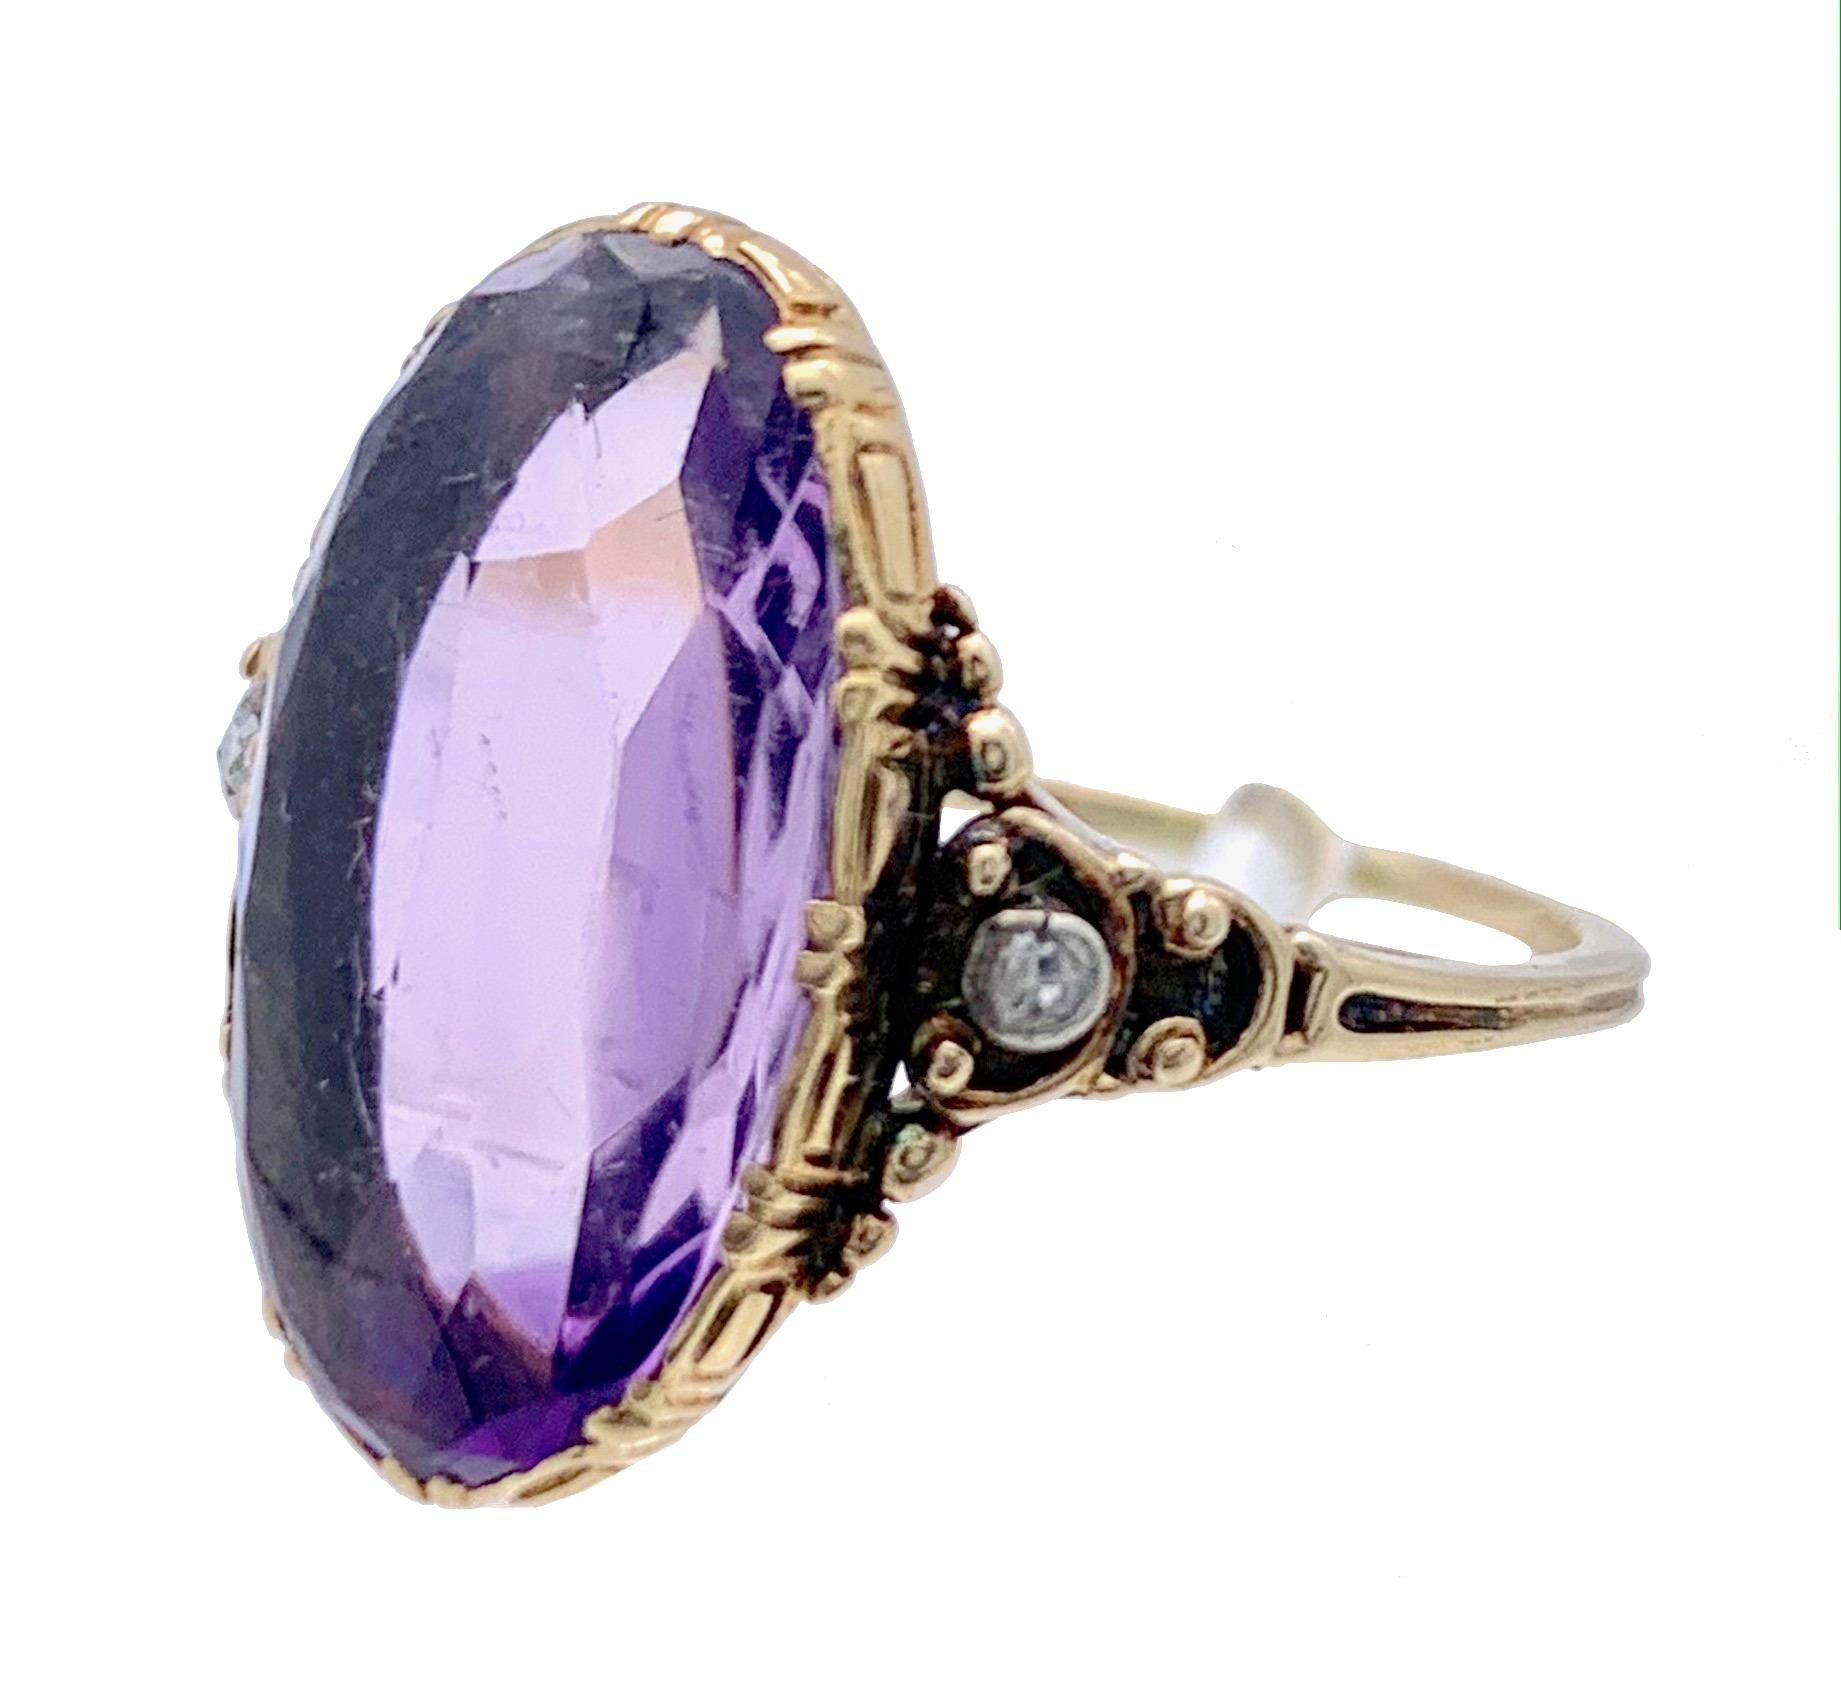 This oval amethyst cabochon is set in an elegant Art Nouveau ring. The ring shoulders are embellished with diamonds and granulation. 